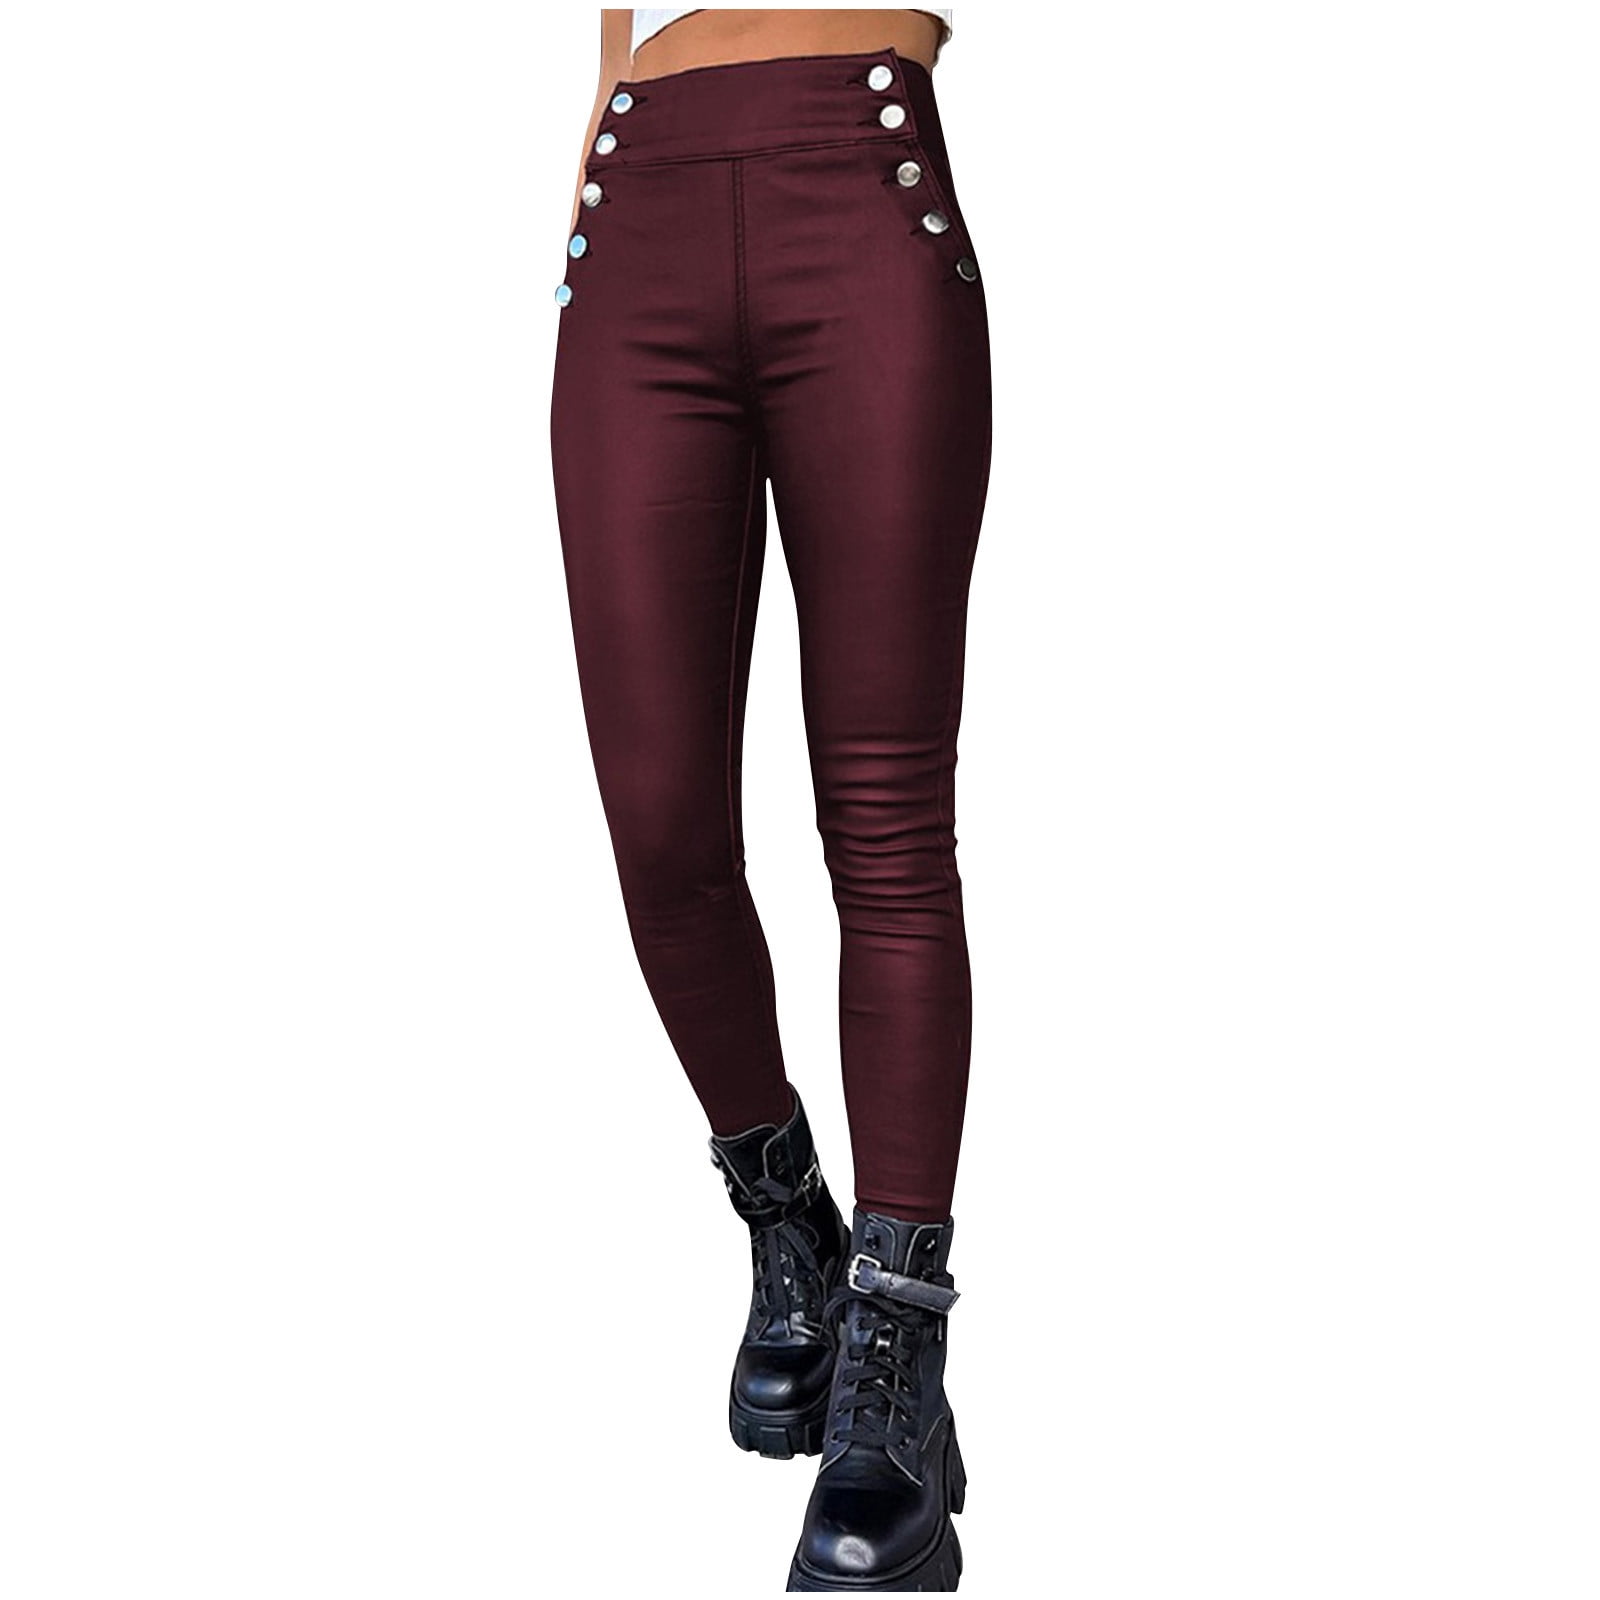 New PU Leather Pants Women's Solid Color Sexy High Waist Tights